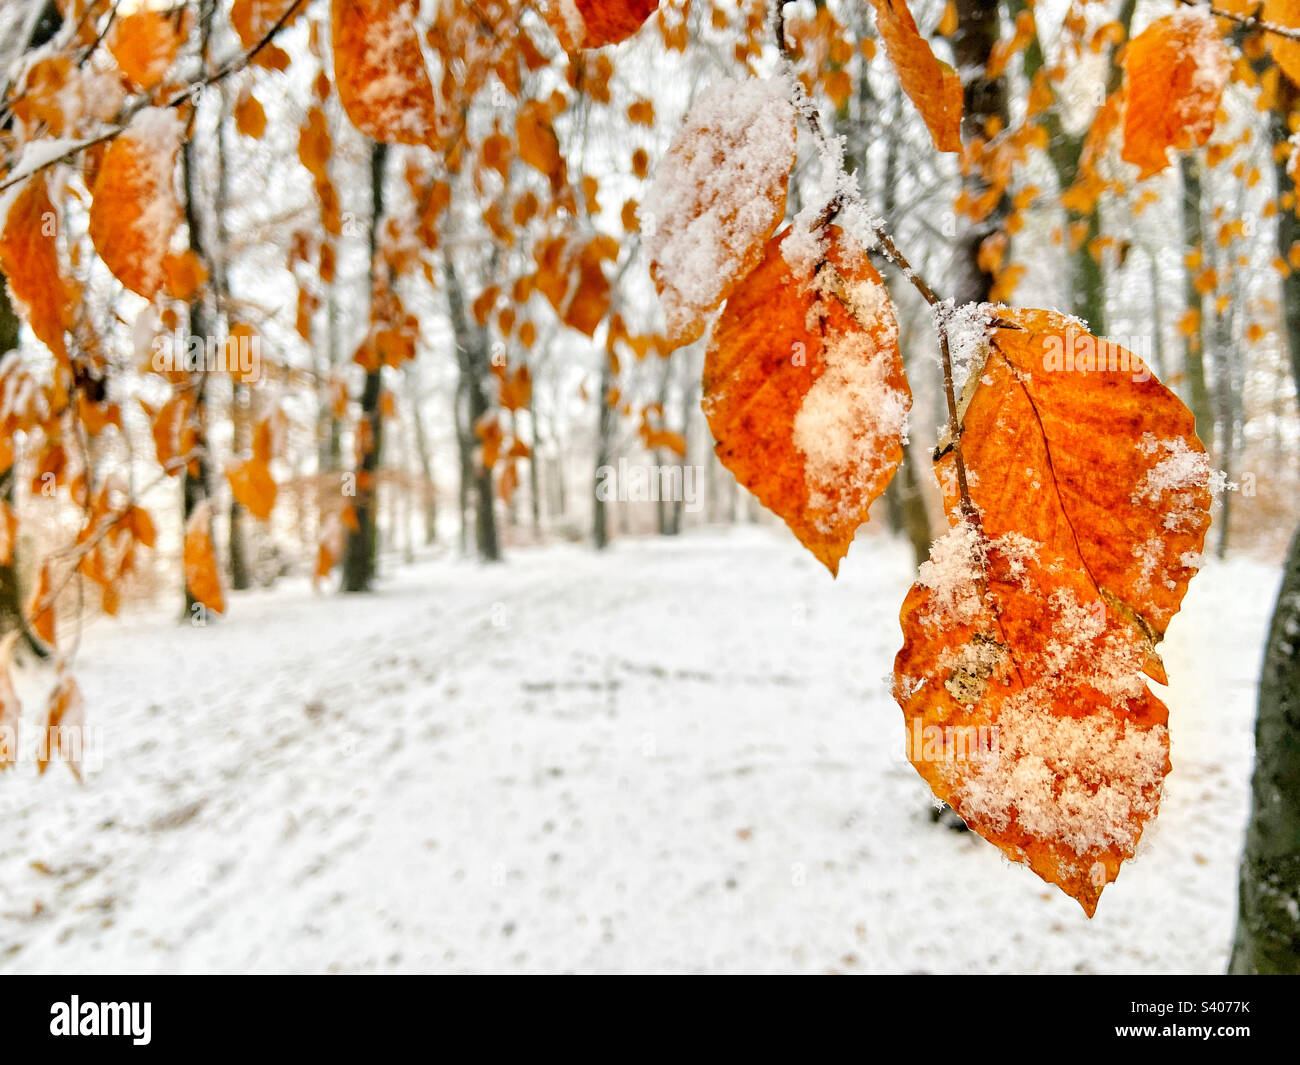 Snow covered late autumn leaves against a snow covered woodland backdrop Stock Photo